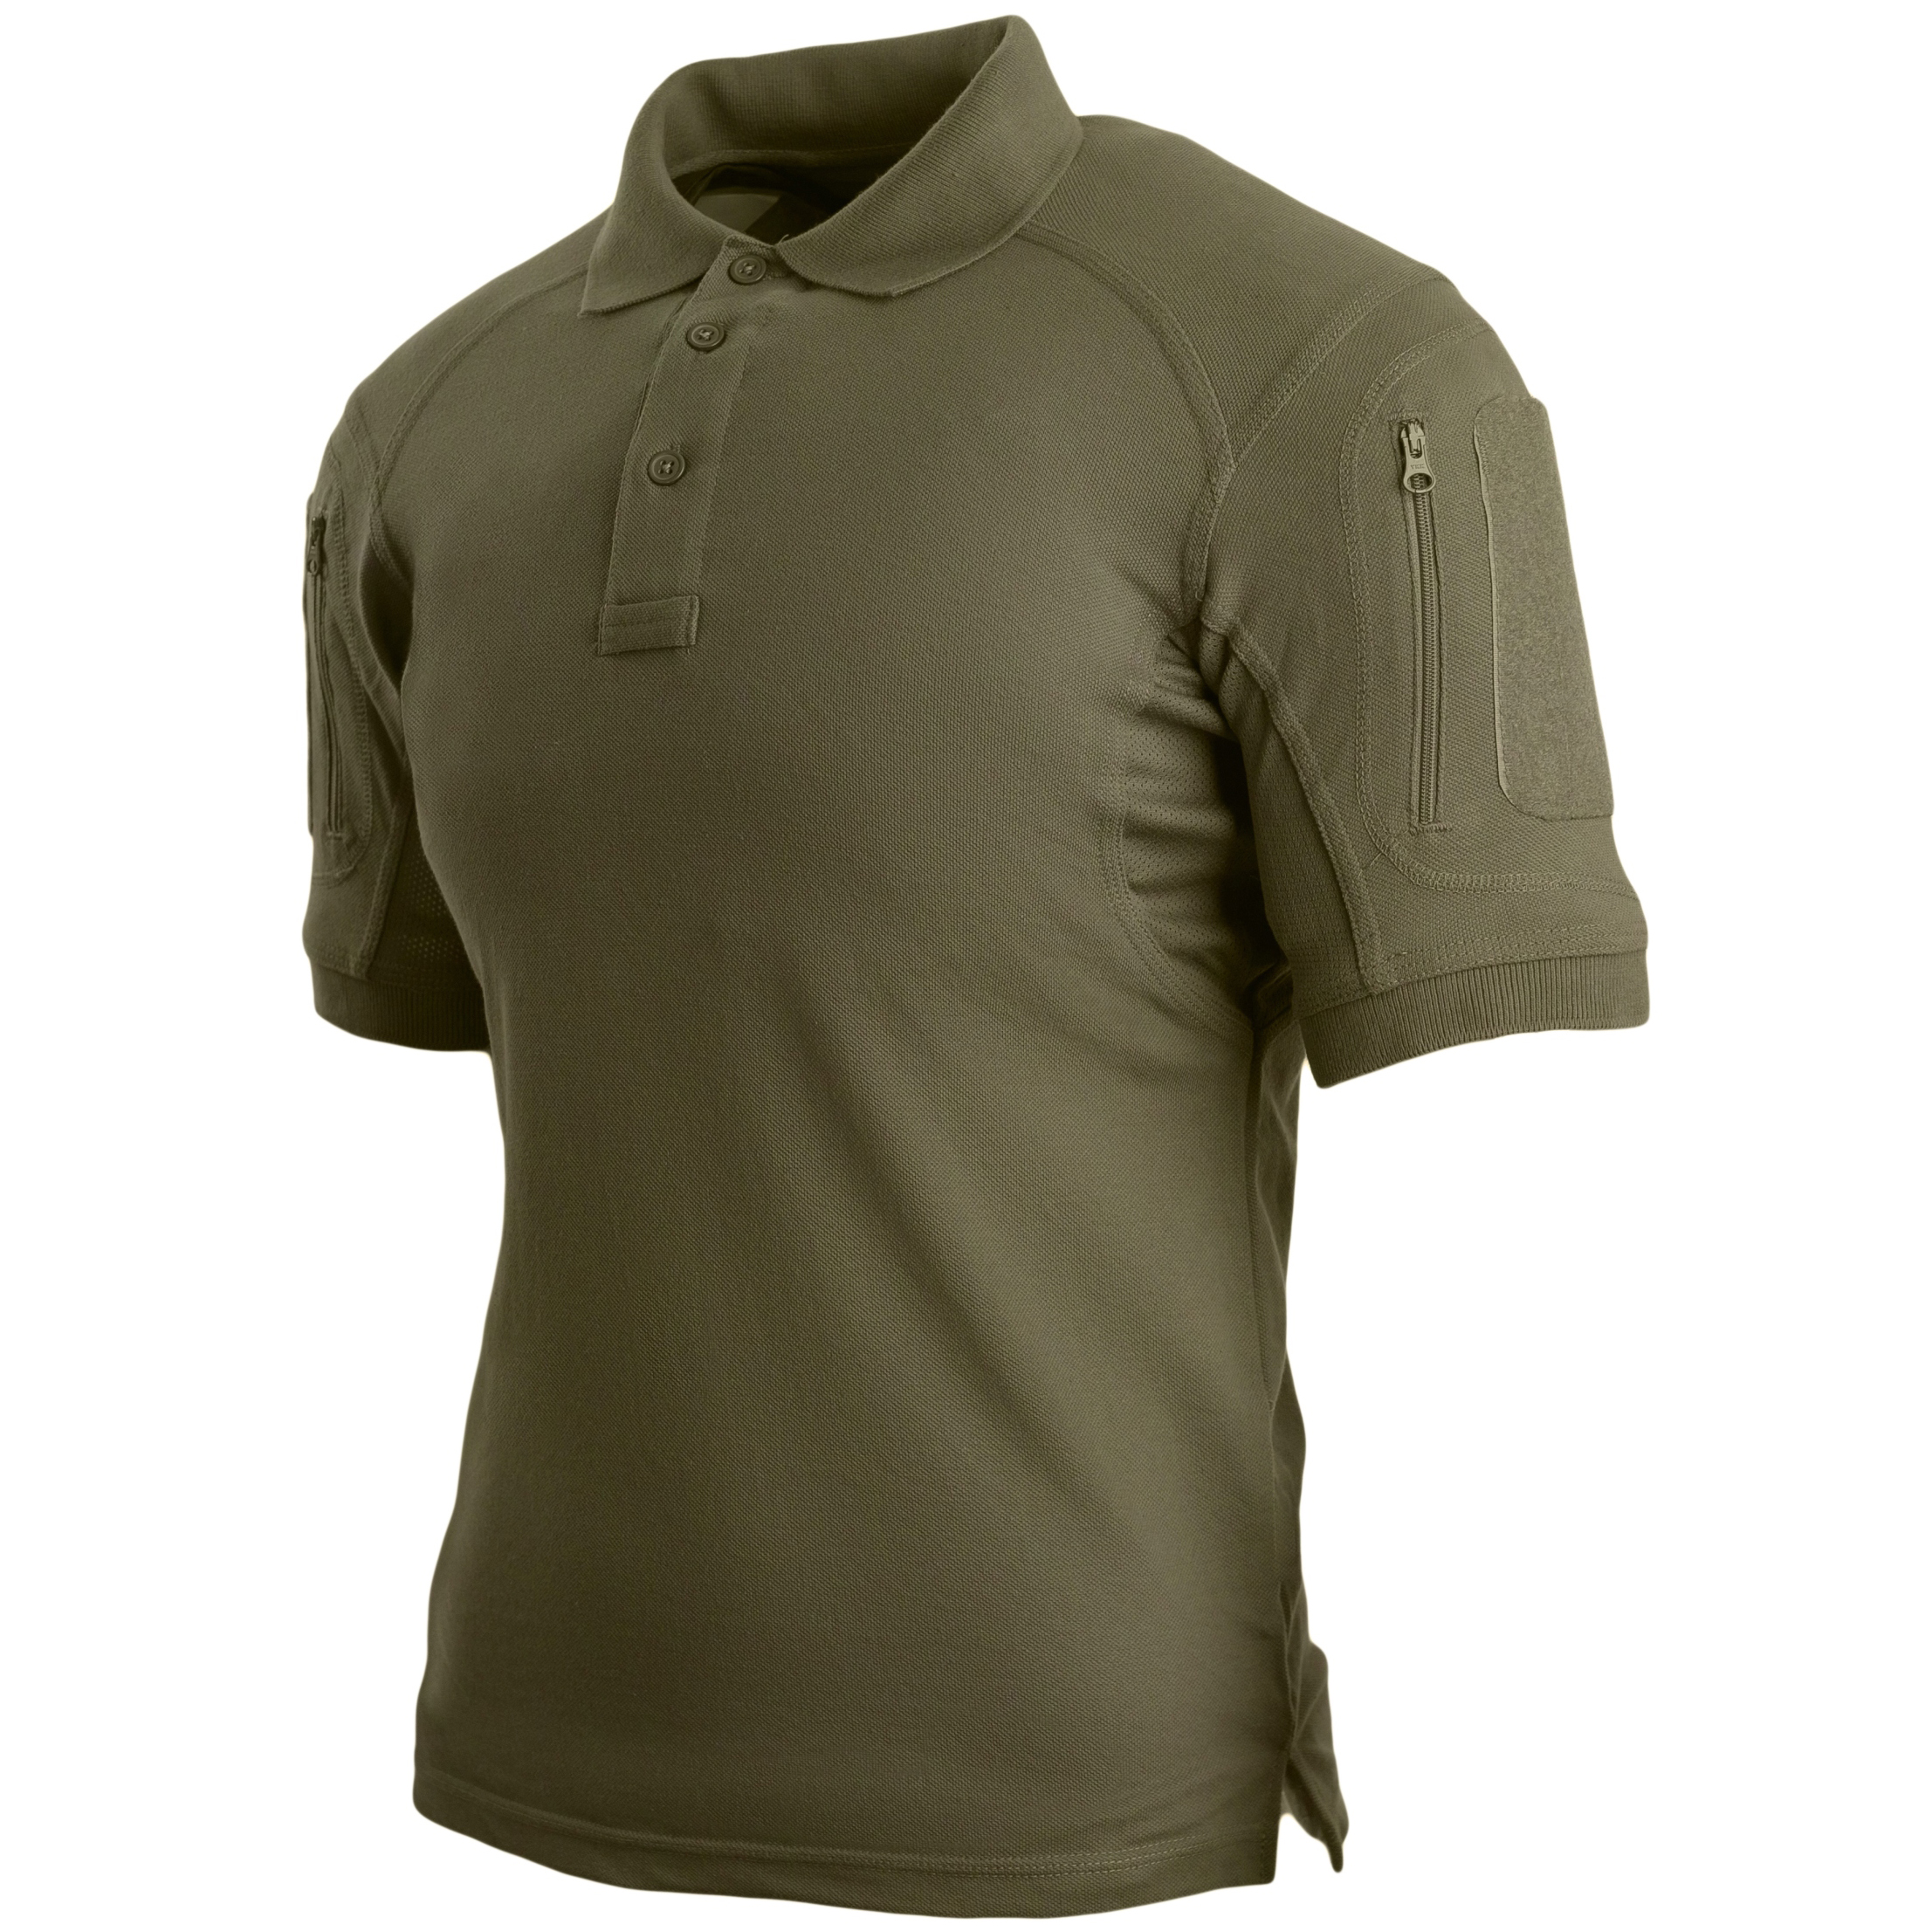 Men's Outdoor Military Solid Chic Color Zipper Polo Shirt